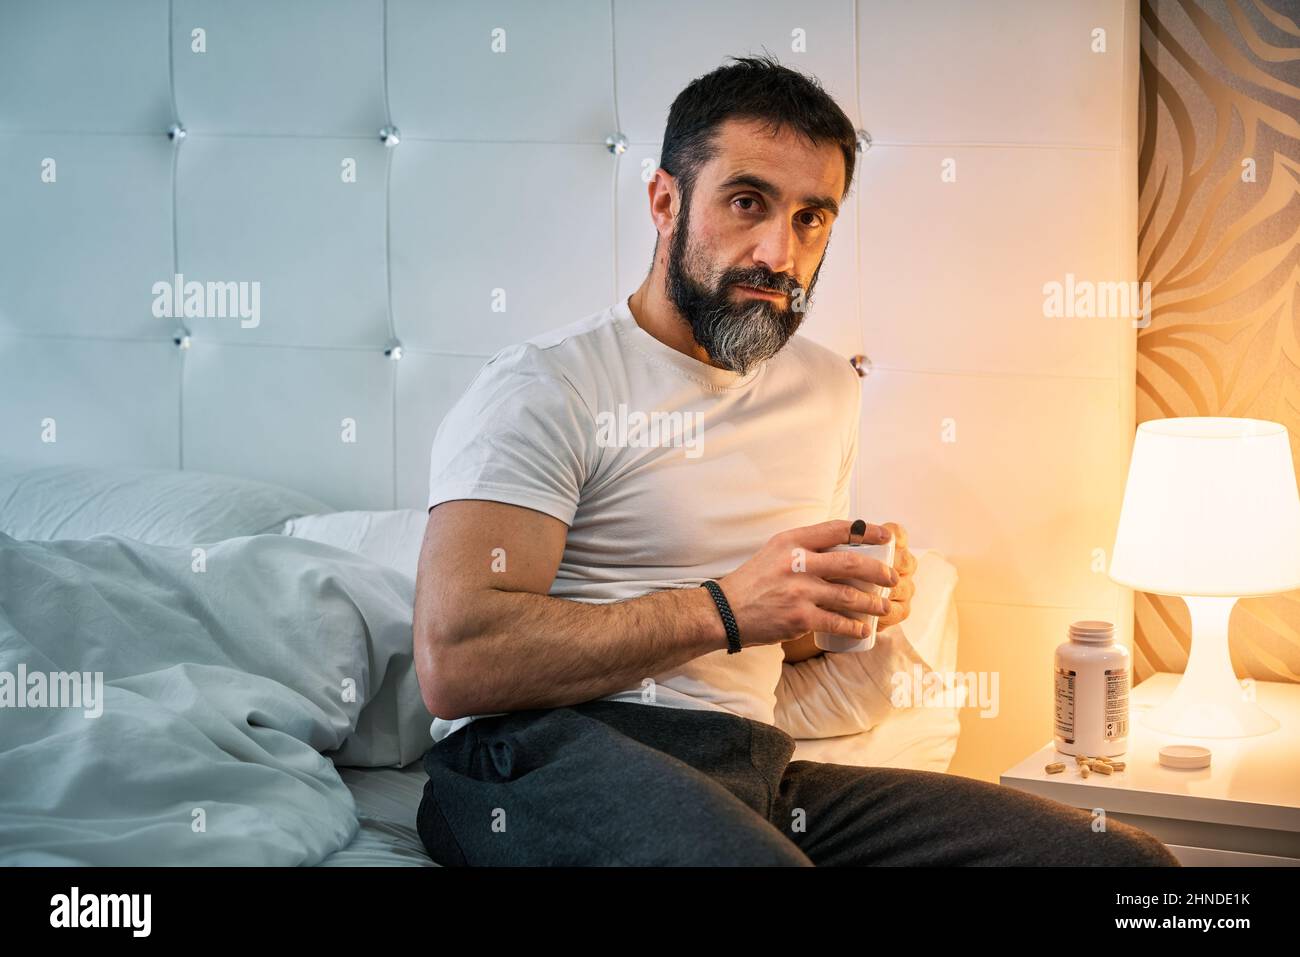 person with some kind of problem sitting on the bed enjoying a cup of coffee or infusion. Stock Photo